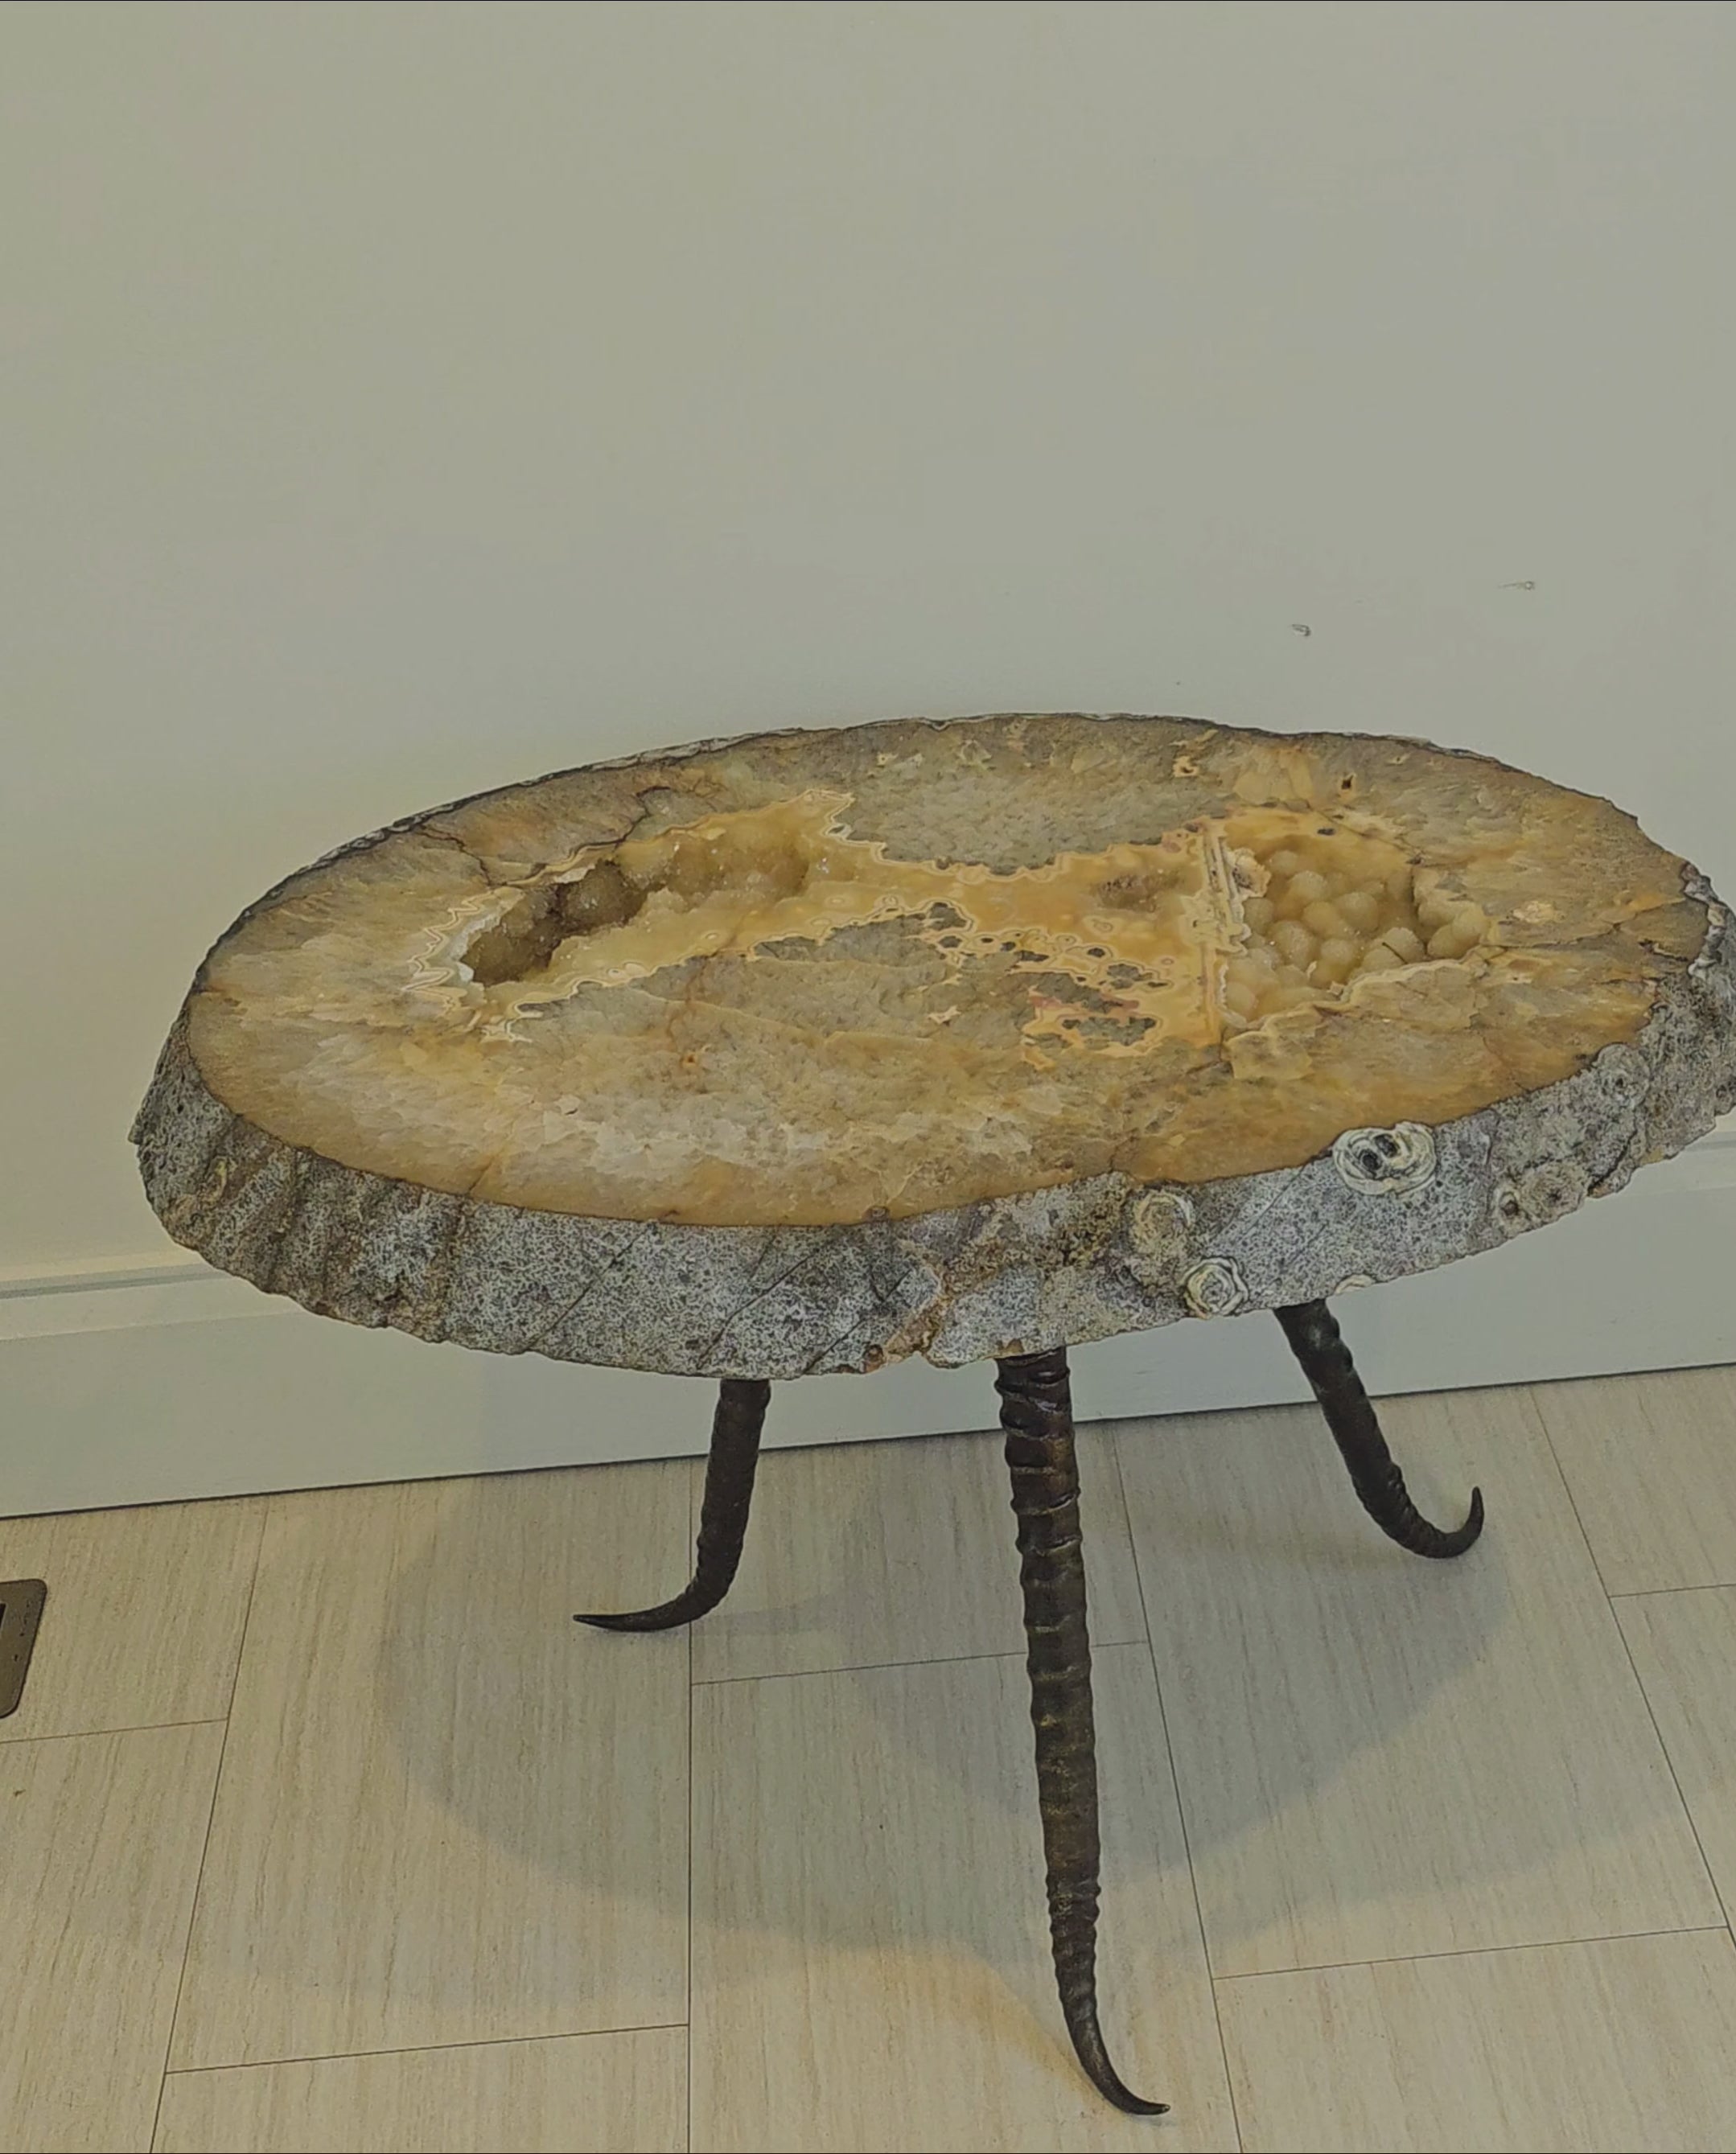 "Serengeti" Antelope Horn Base citrine table. Cast in Solid Bronze {Very Ltd Edition! 4 pieces only in 2 Heights!